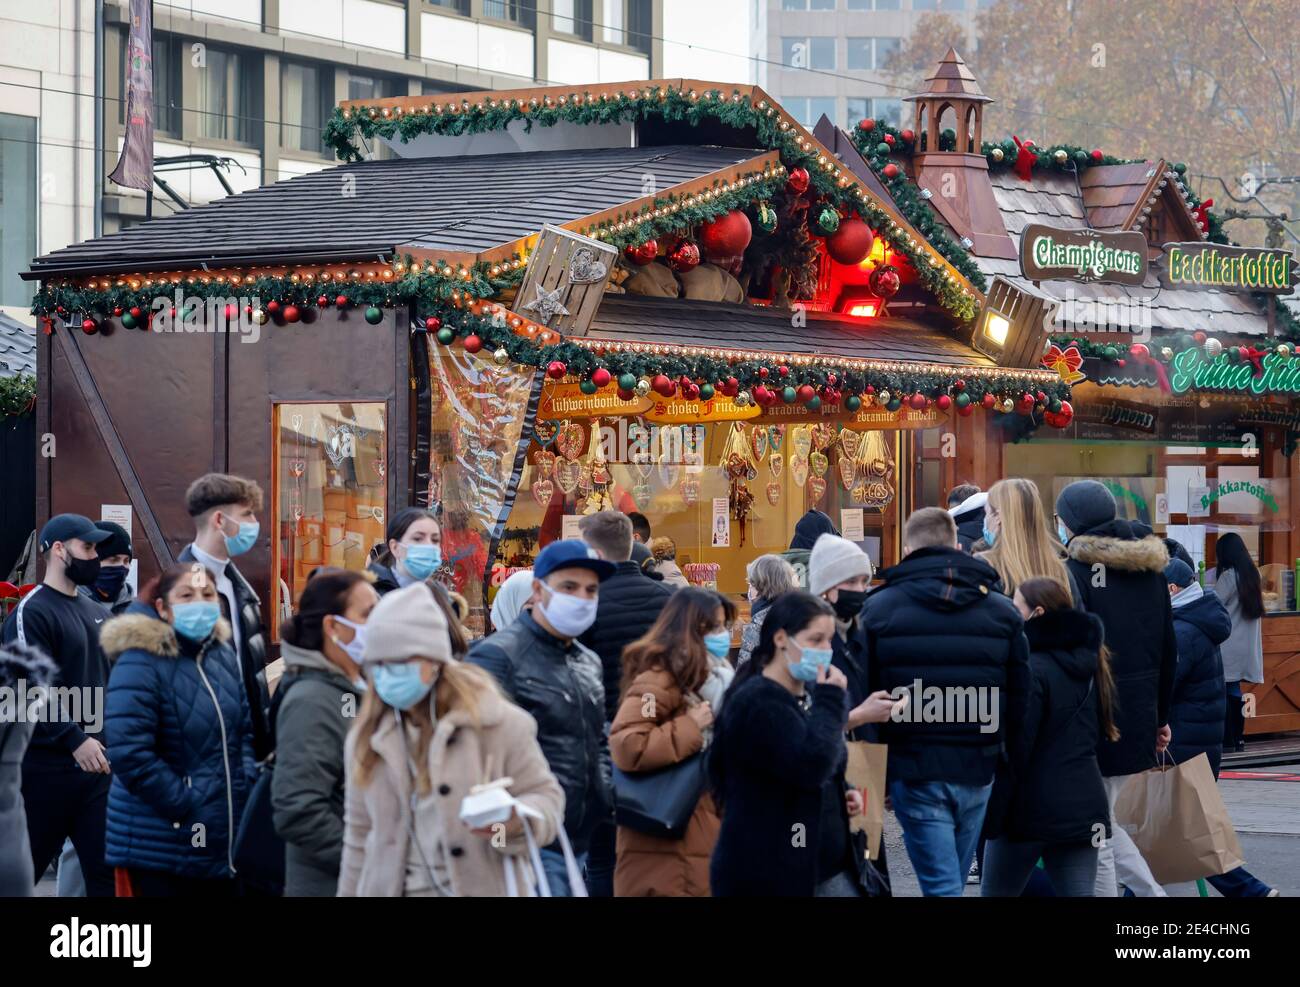 Duesseldorf, North Rhine-Westphalia, Germany - Duesseldorf old town in times of the corona crisis during the second part of the lockdown, individual Christmas market stalls are in the pedestrian zone. Stock Photo